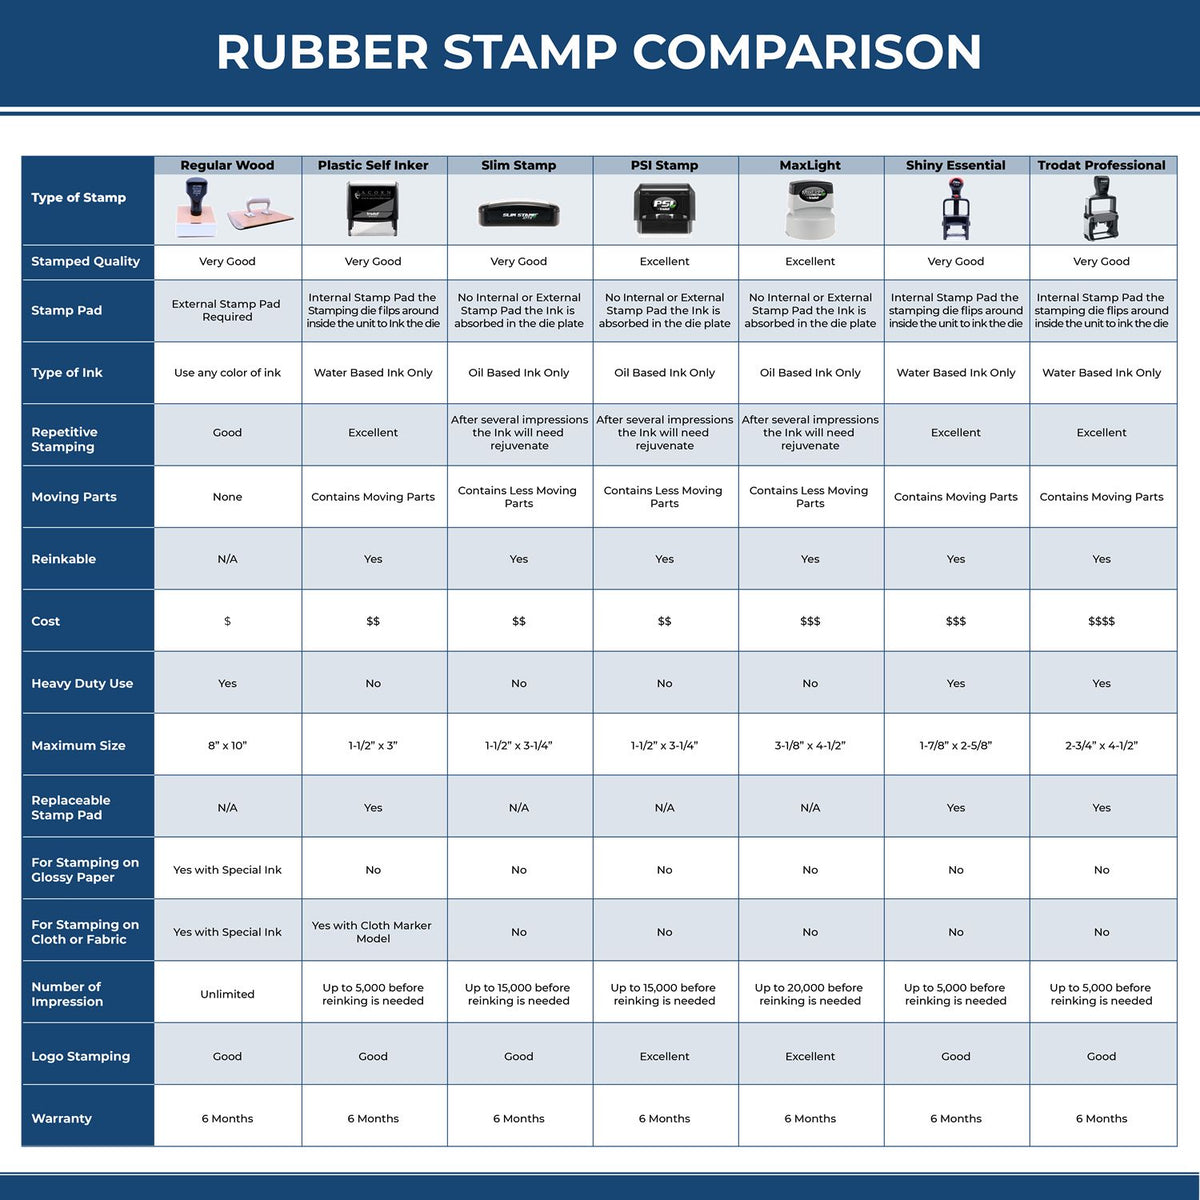 A comparison chart for the different types of mount models available for the Slim Pre-Inked Massachusetts Landscape Architect Seal Stamp.